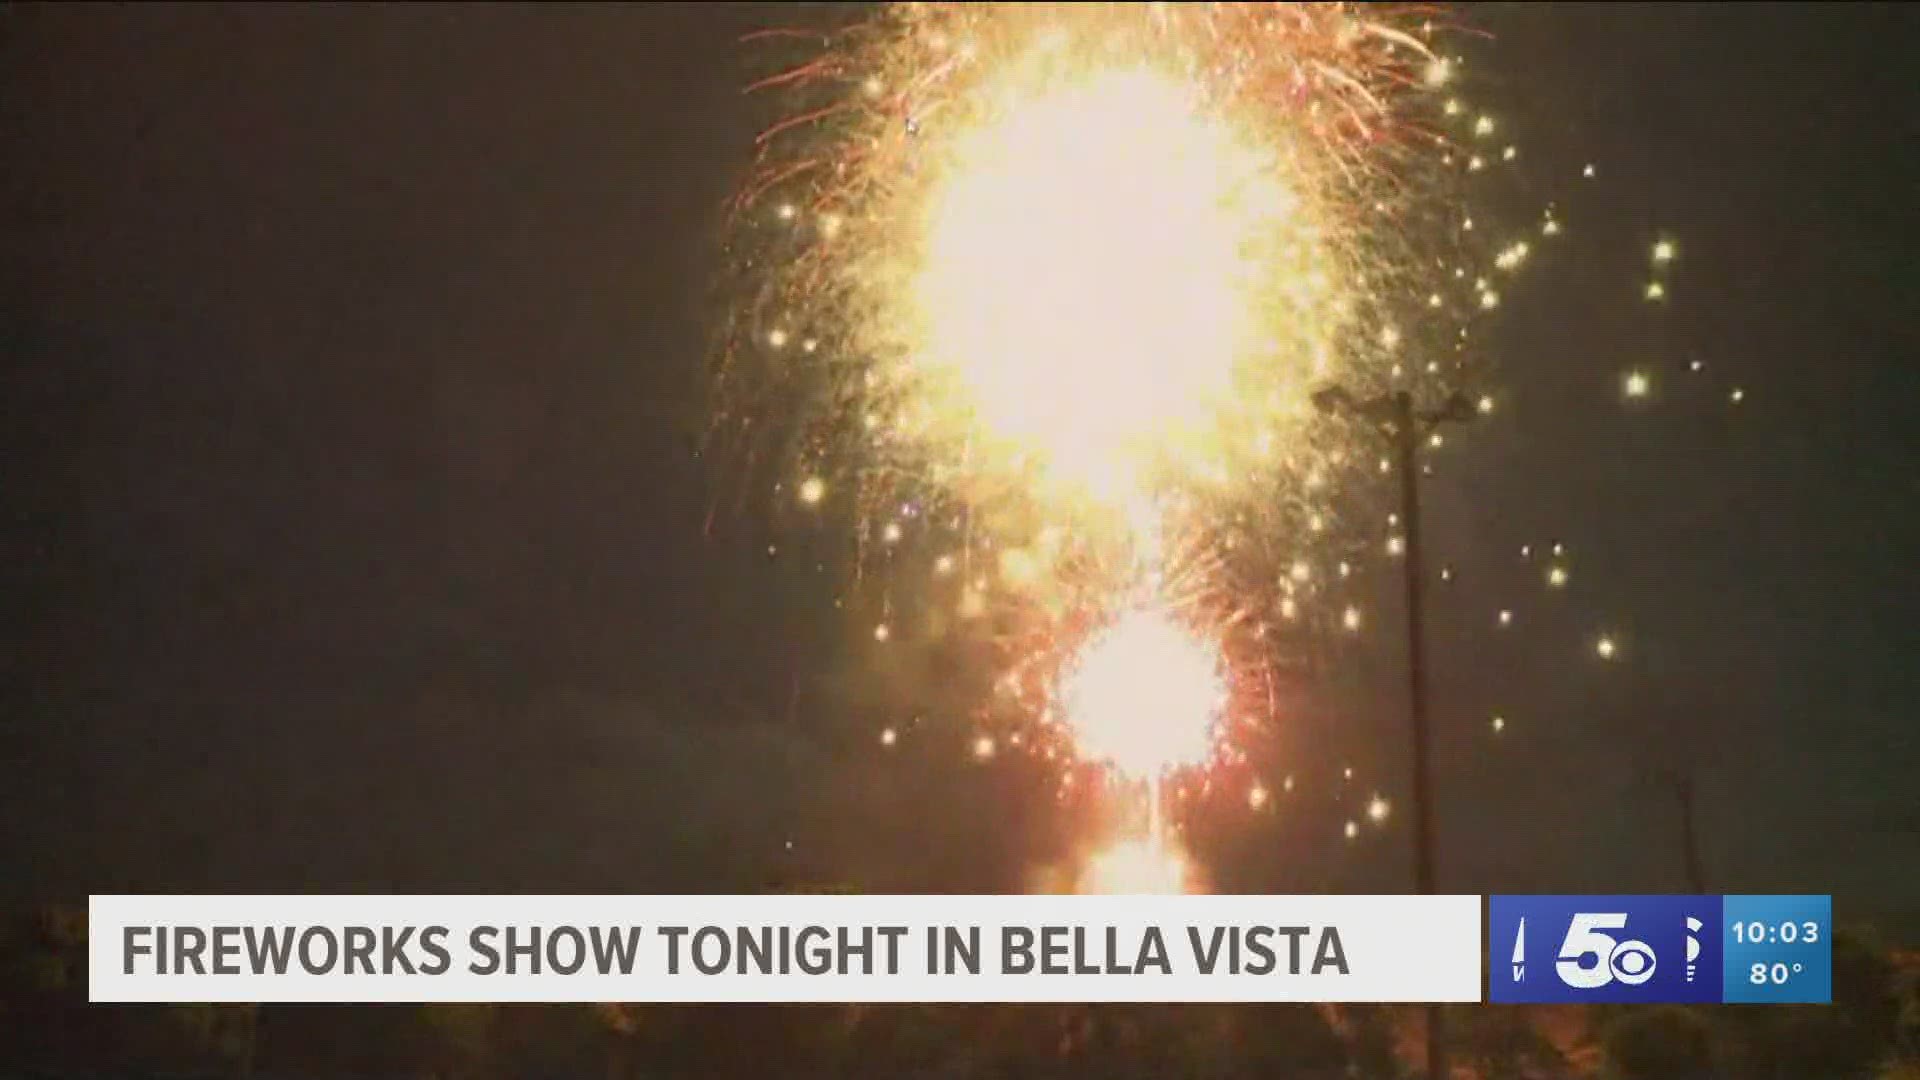 Things may have been a little different this year, but families still got out to celebrate Independence Day a little early in Bella Vista.